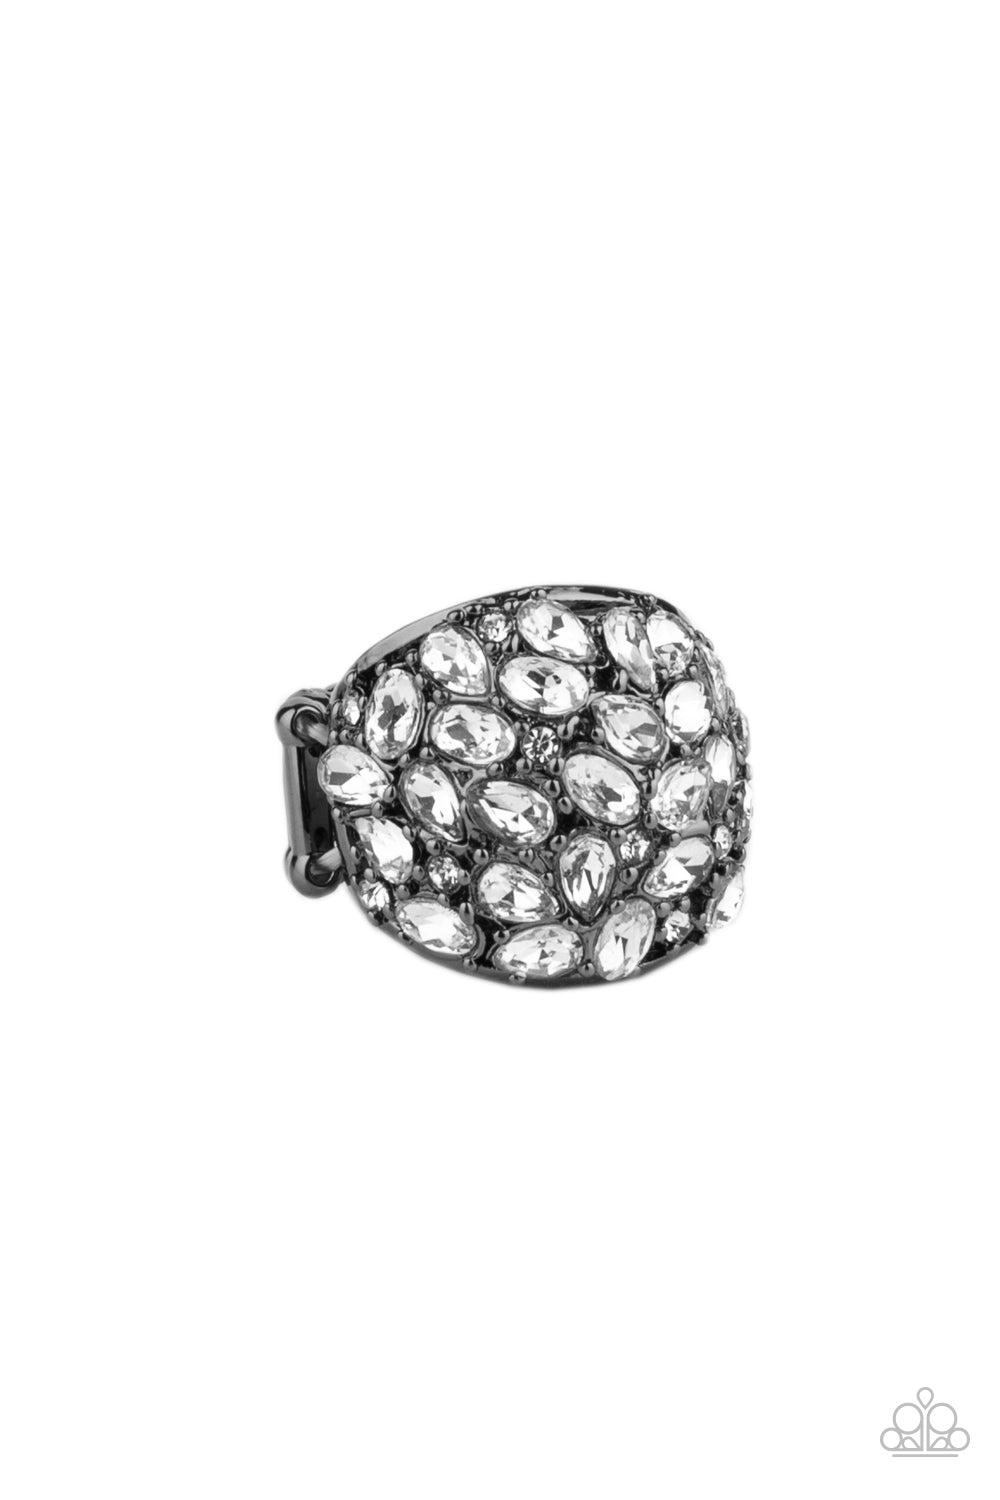 &lt;P&gt; An explosion of glittery white teardrop rhinestones scatter across the front of a thick gunmetal studded frame, creating a blinding statement piece. Features a stretchy band for a flexible fit.&lt;/P&gt;  

&lt;P&gt; &lt;I&gt;  Sold as one individual ring.
&lt;/I&gt;&lt;/P&gt;

&lt;img src=\&quot;https://d9b54x484lq62.cloudfront.net/paparazzi/shopping/images/517_tag150x115_1.png\&quot; alt=\&quot;New Kit\&quot; align=\&quot;middle\&quot; height=\&quot;50\&quot; width=\&quot;50\&quot;/&gt;